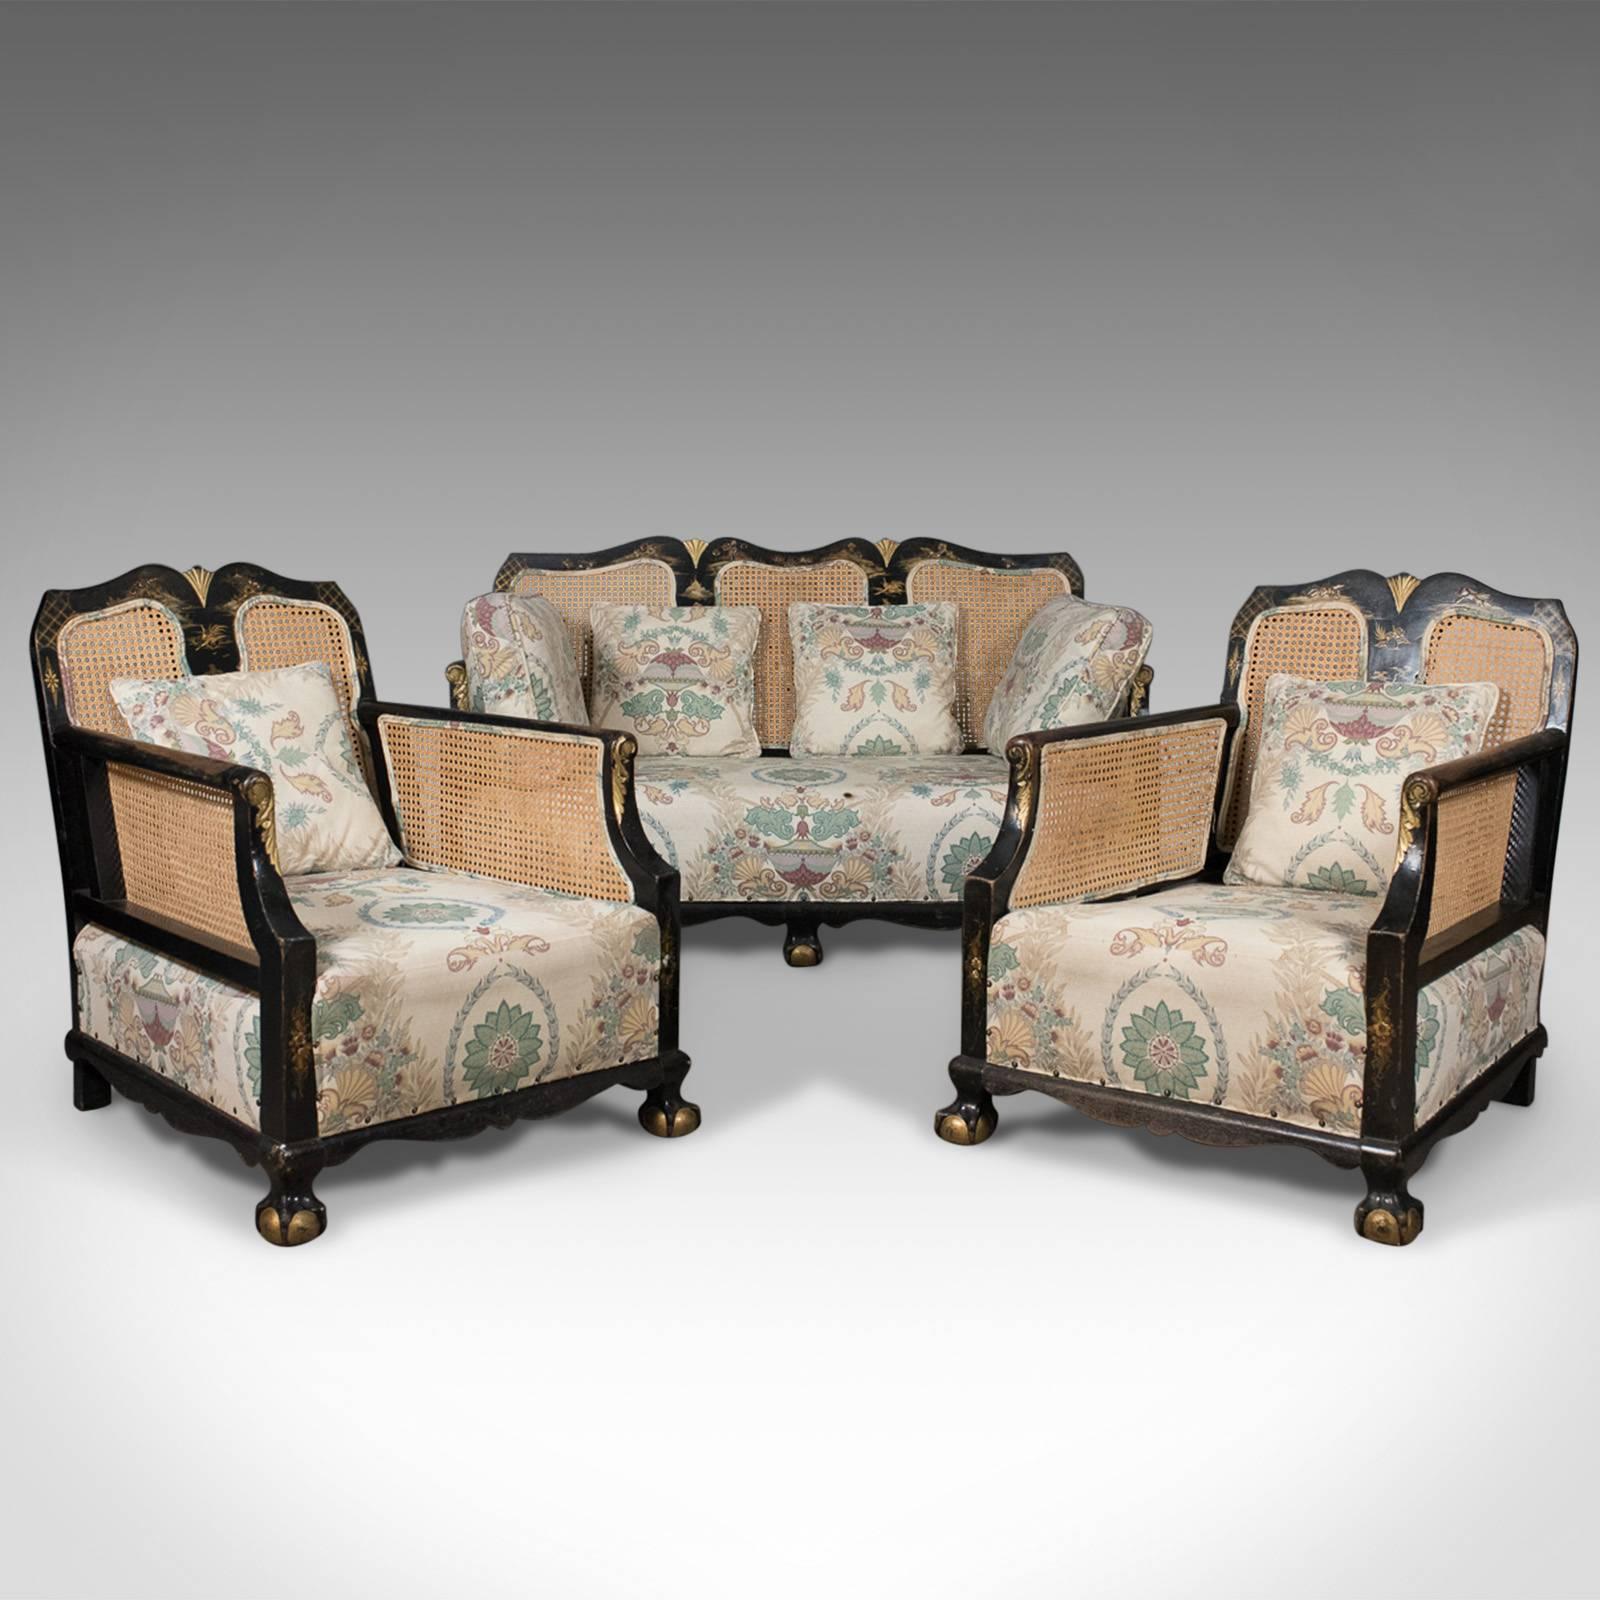 This is an attractive Aesthetic Movement, antique, conservatory suite in the chinoiserie taste and bergere style.

Appealing ebonised frame highlighted in gold with a desirable aged patina
Raised on generous talon and ball feet – the balls in